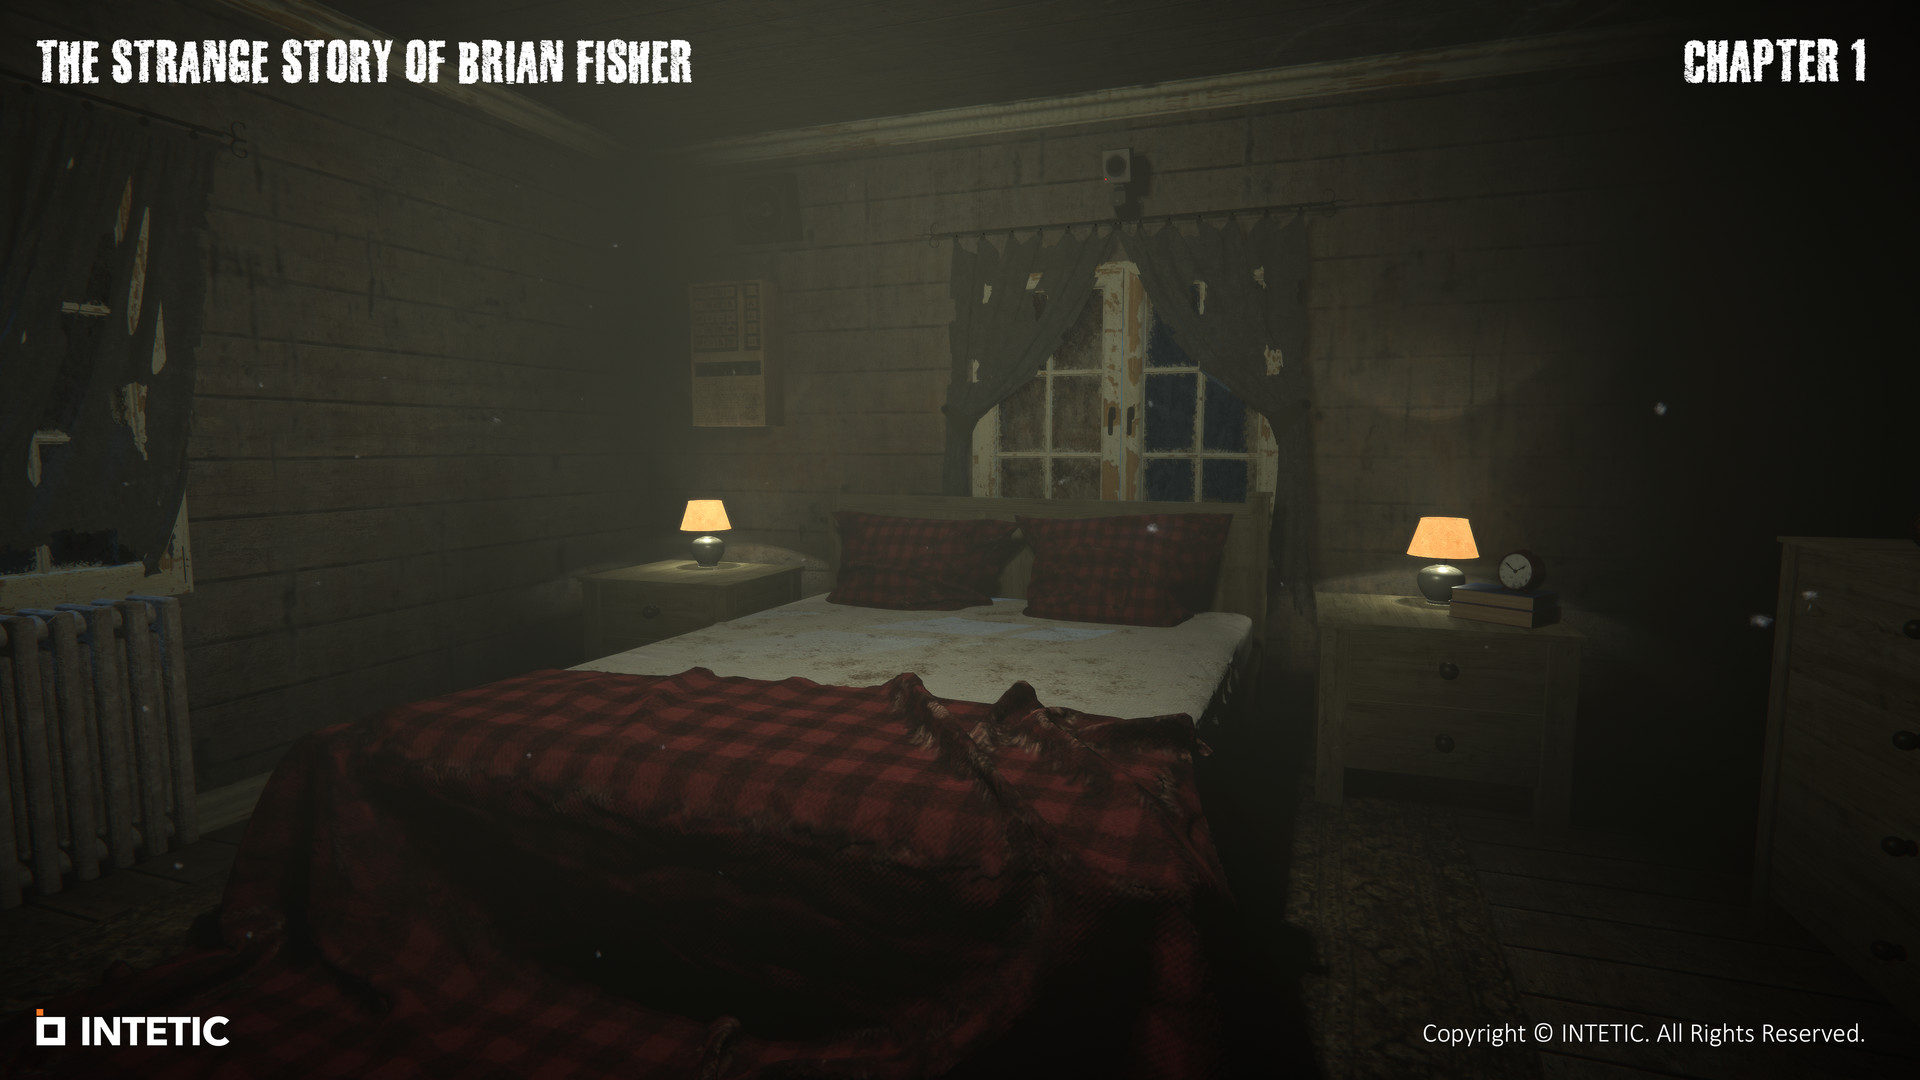 The Strange Story Of Brian Fisher: Chapter 1 Free Download